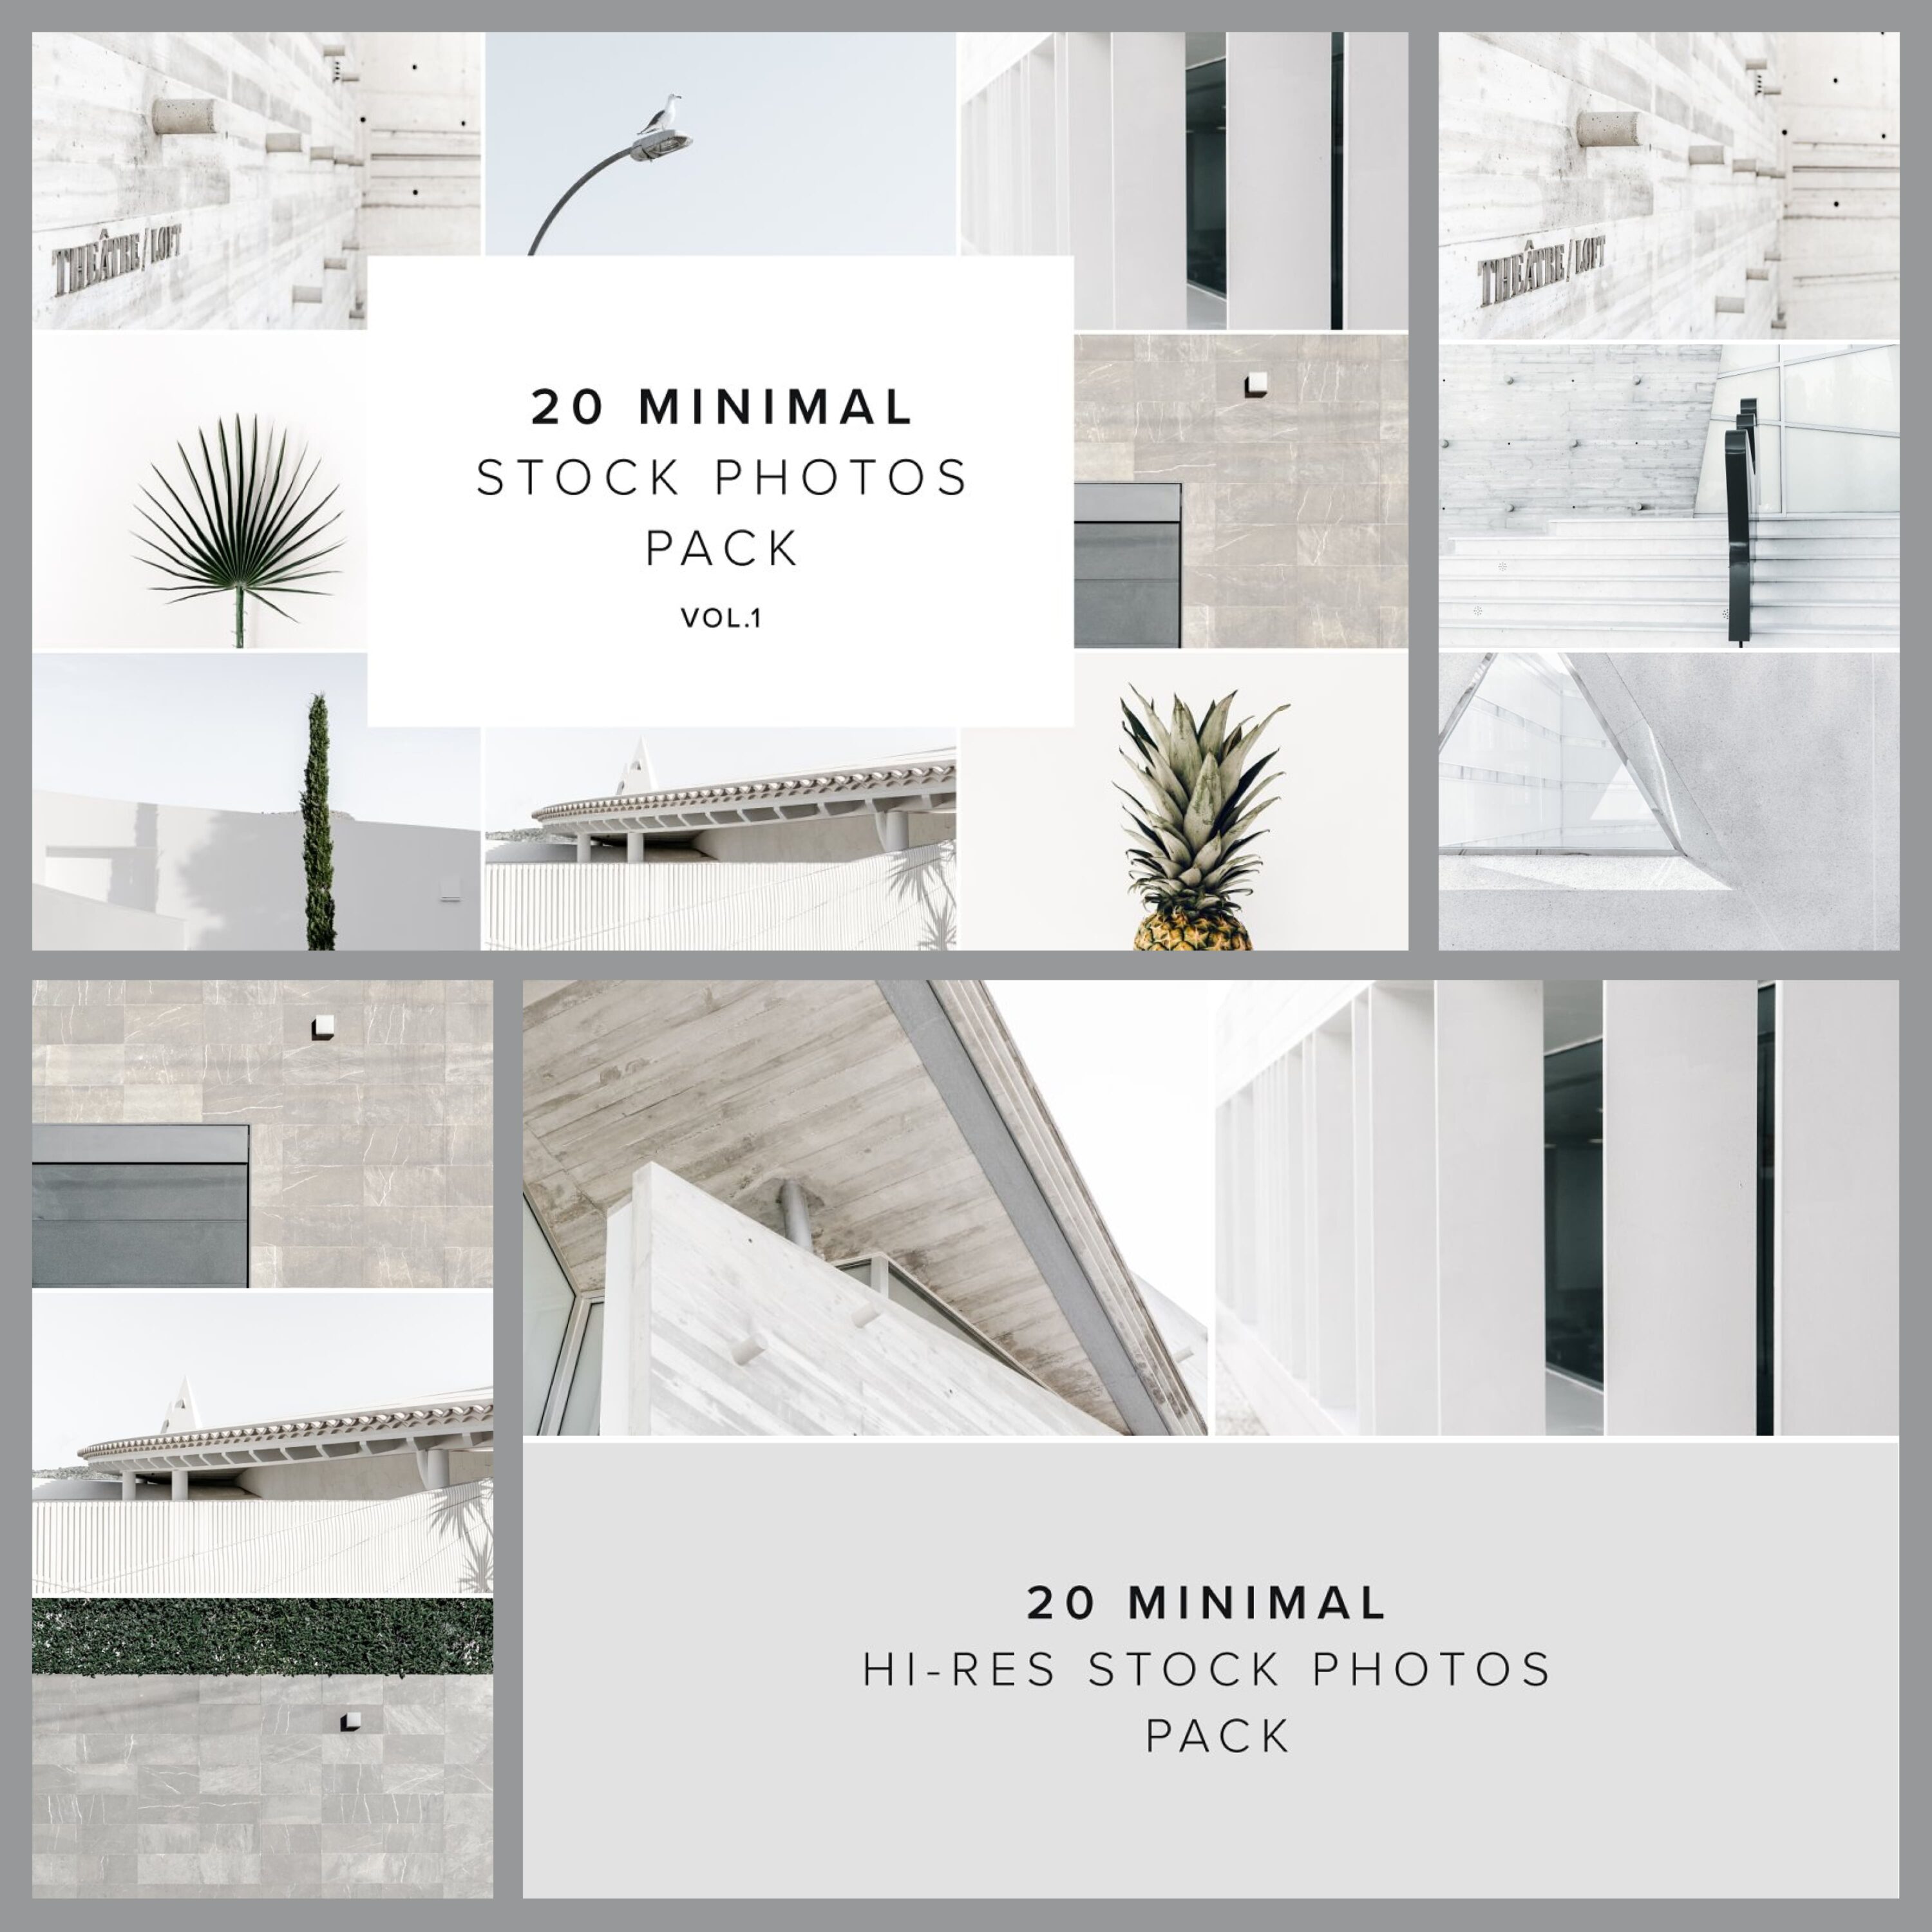 20 Stock Photo Minimal Pack vol.1 Cover.